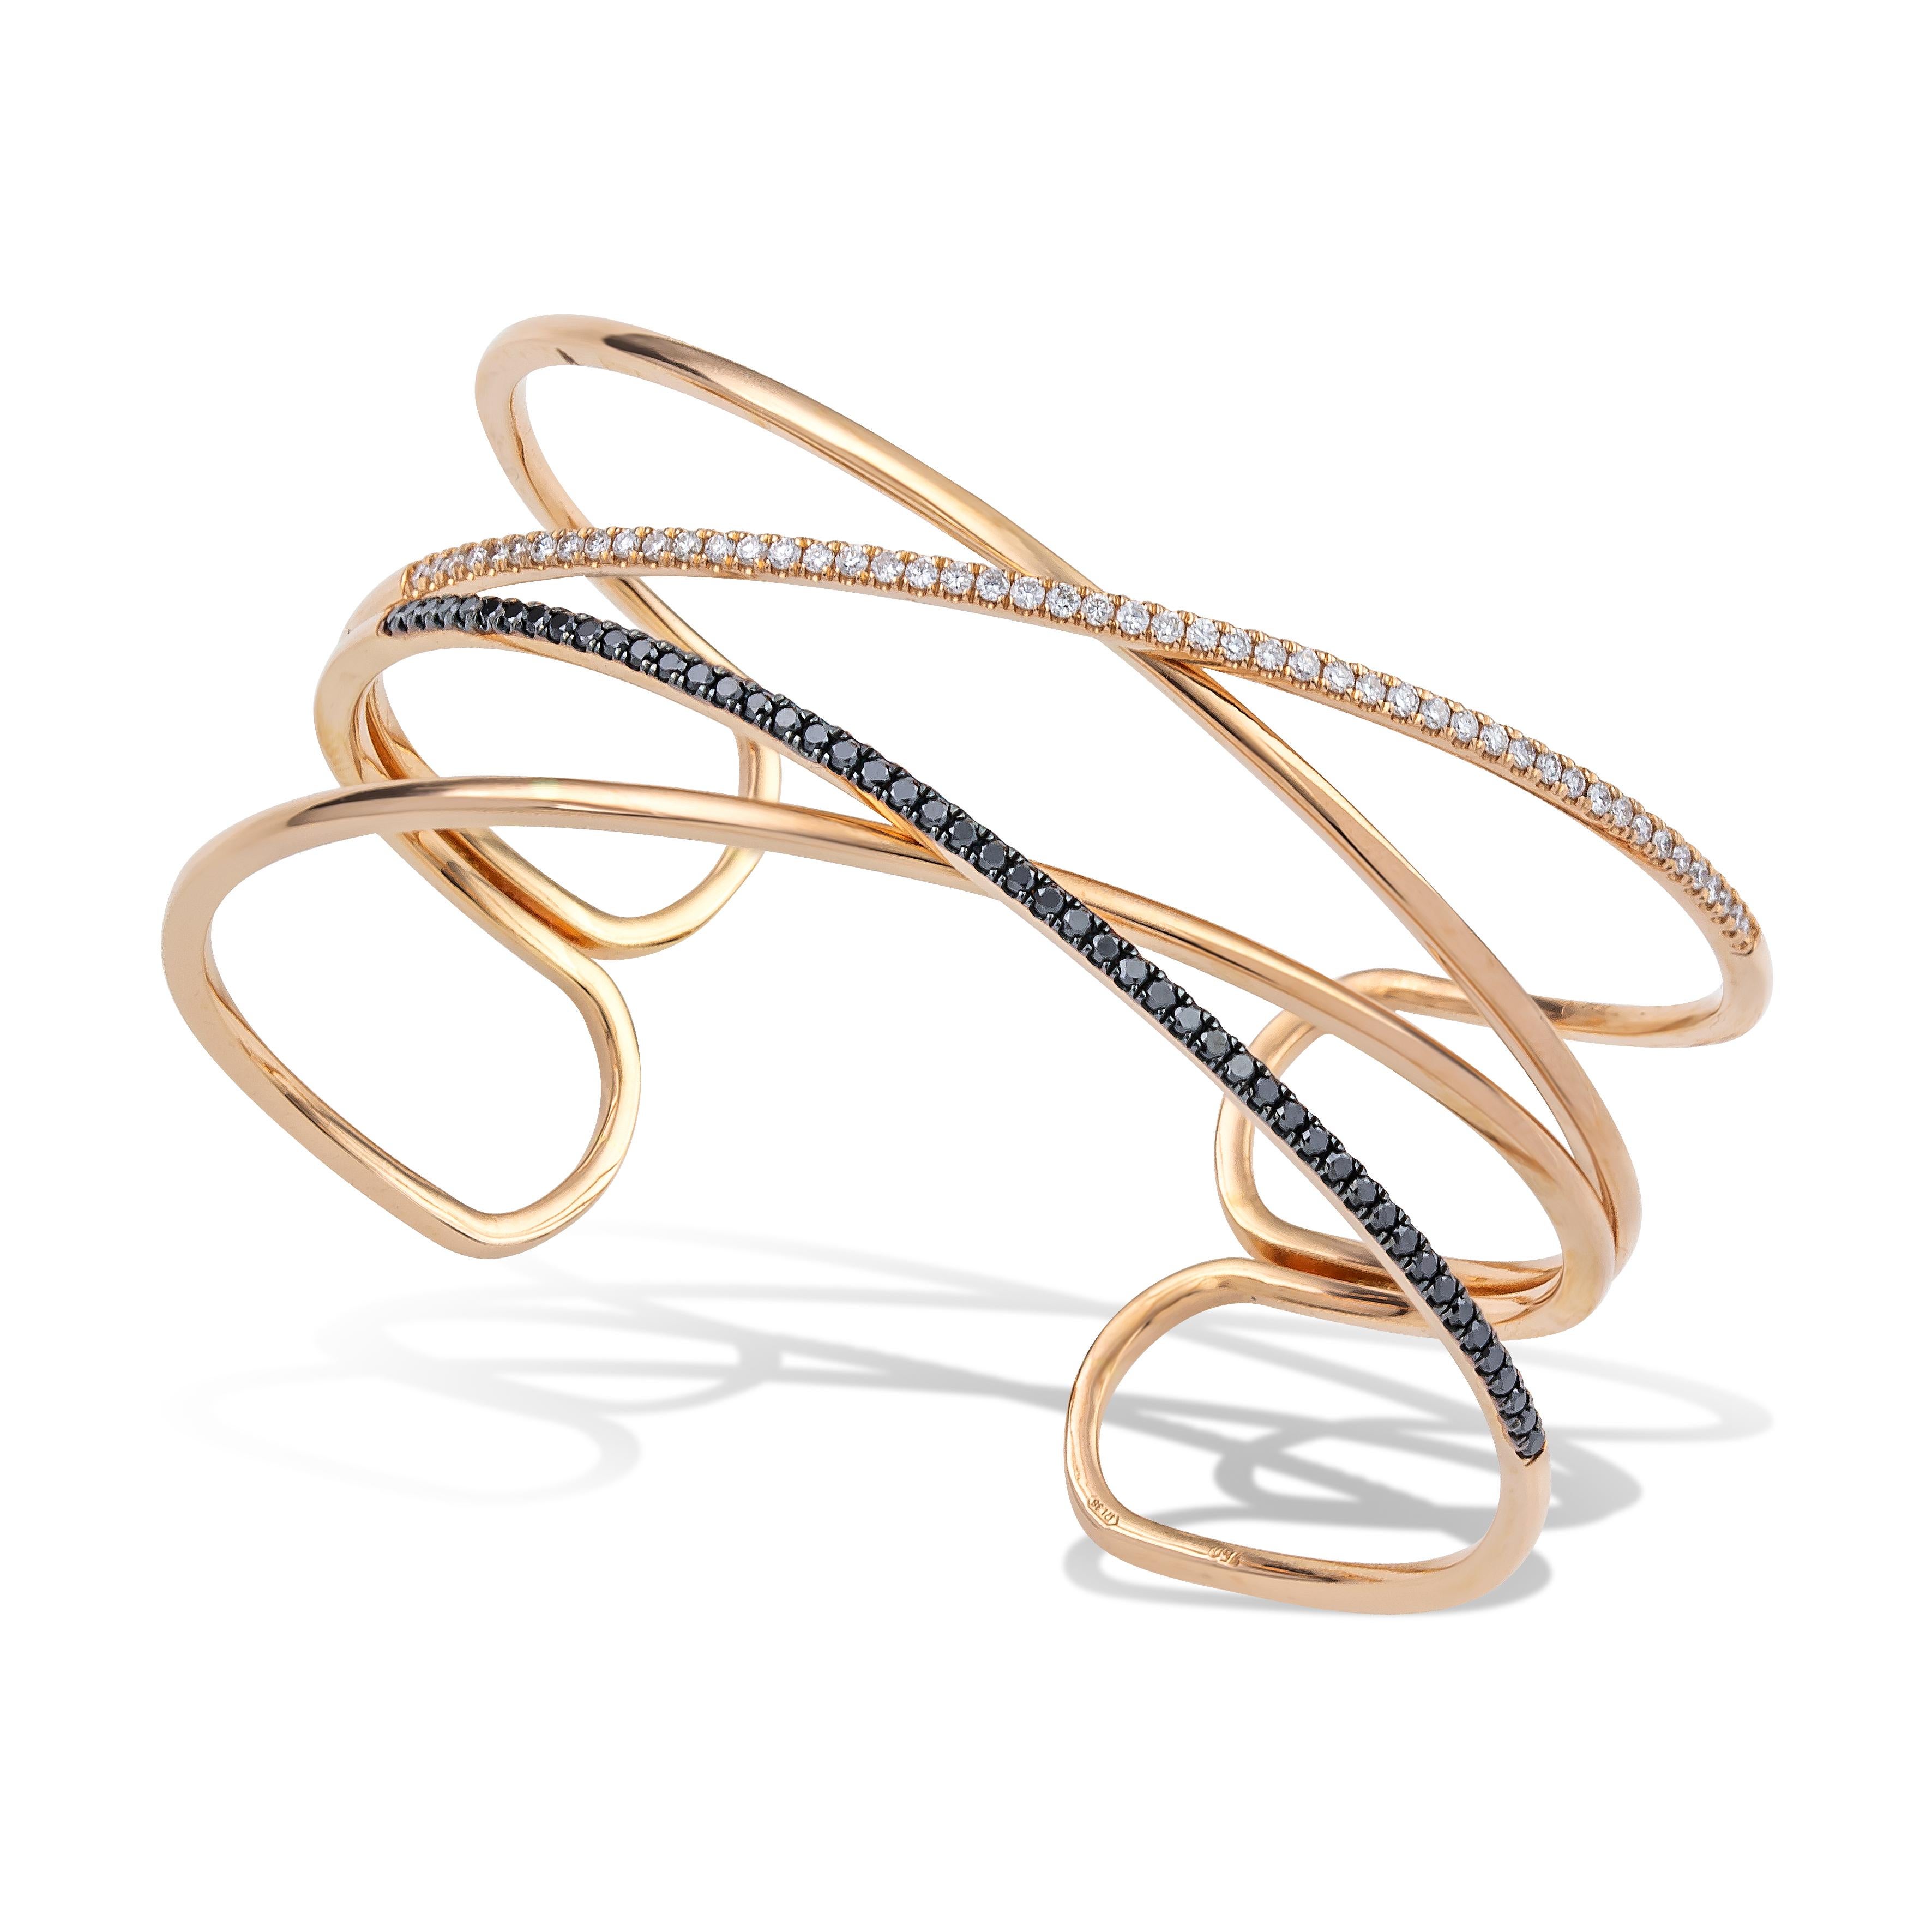 Unique Cage Cuff Bracelet with white and black brilliant cut diamonds handcrafted in 18Kt Rose gold. 
Elegant stripes of 18Kt gold create the delicate shilouete of this bracelet around your wrist. The black diamonds contrast sharply with the white